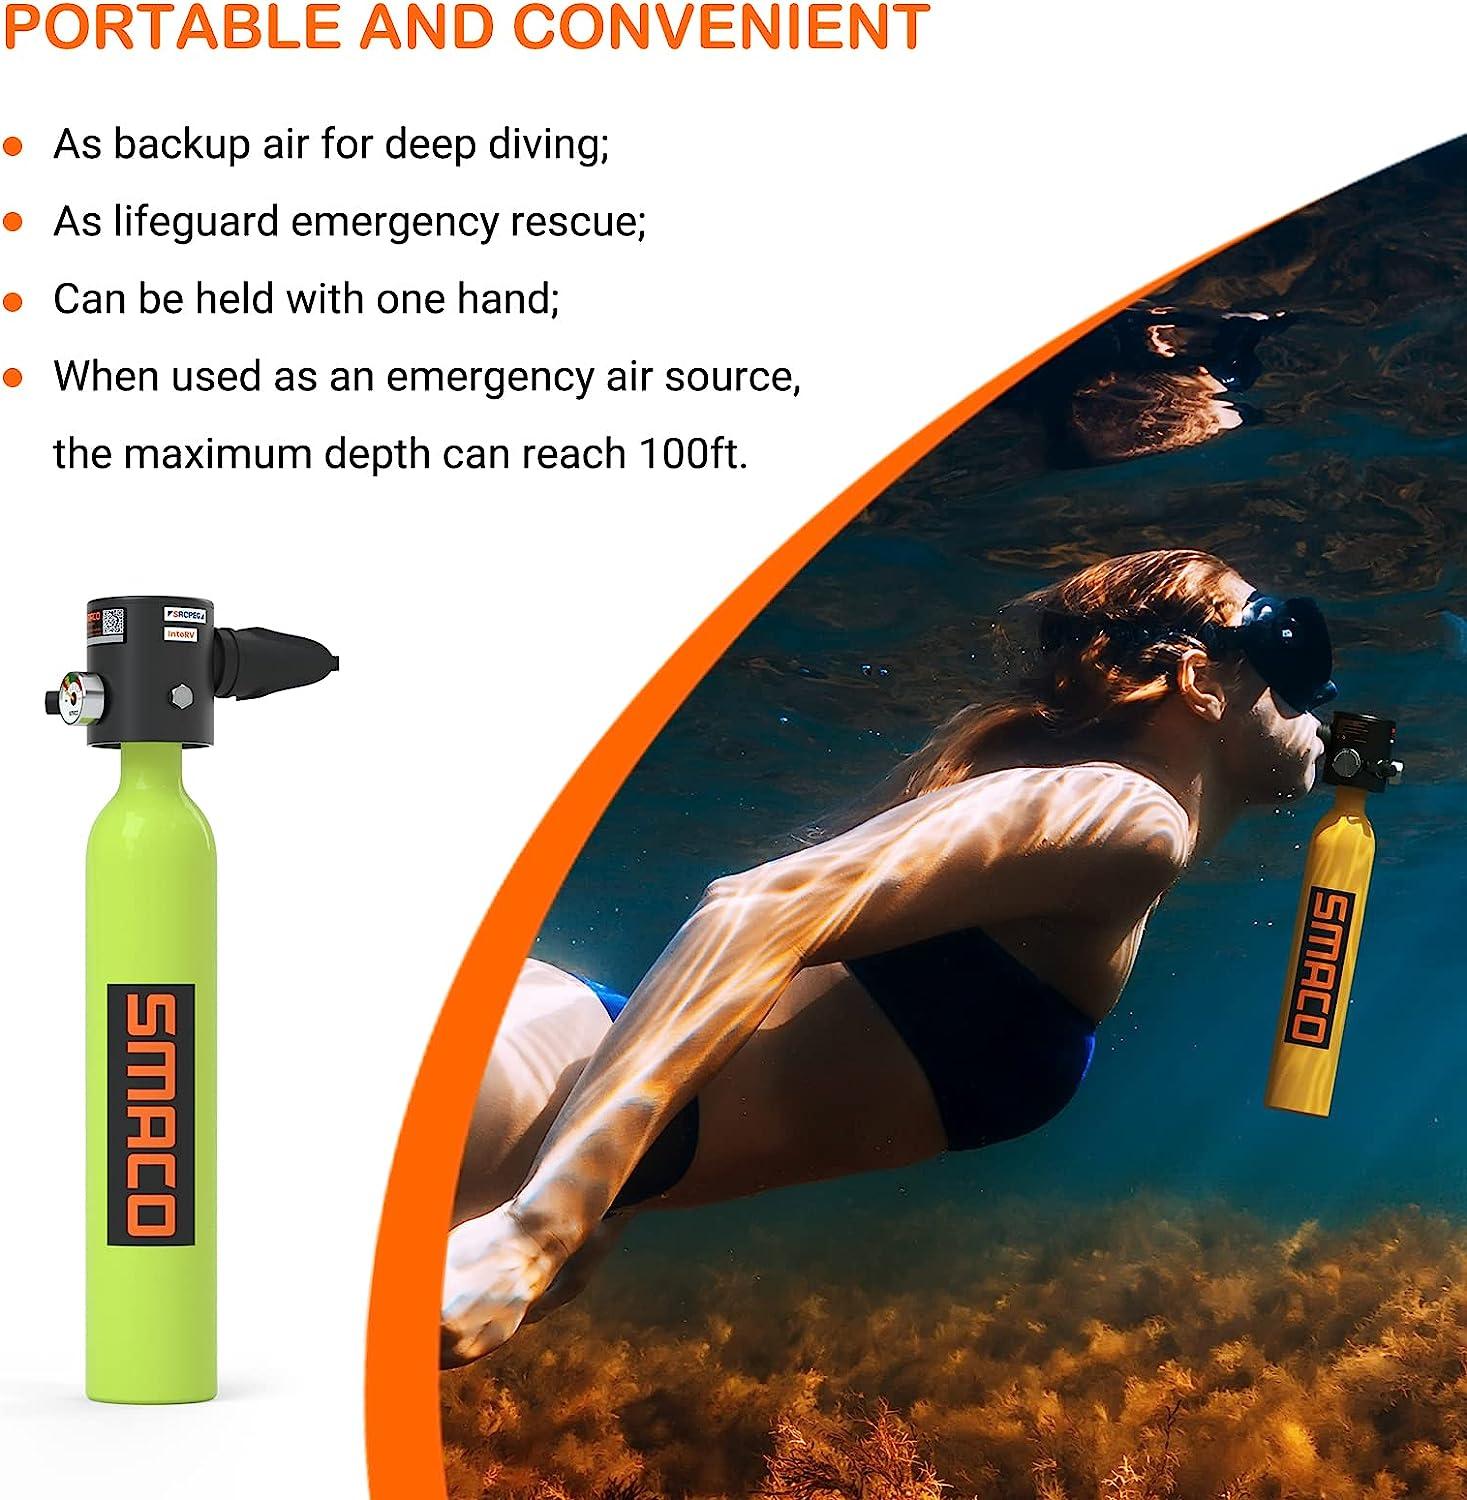 Scuba Tank for Diver Mini Diving Tank Mini Scuba Tank Breath Underwater Device Scuba Cylinder with 6-12 Minutes Diving Oxygen Tank Inflatable Scuba Diving Equipment Provide A Underwater World Tour Green